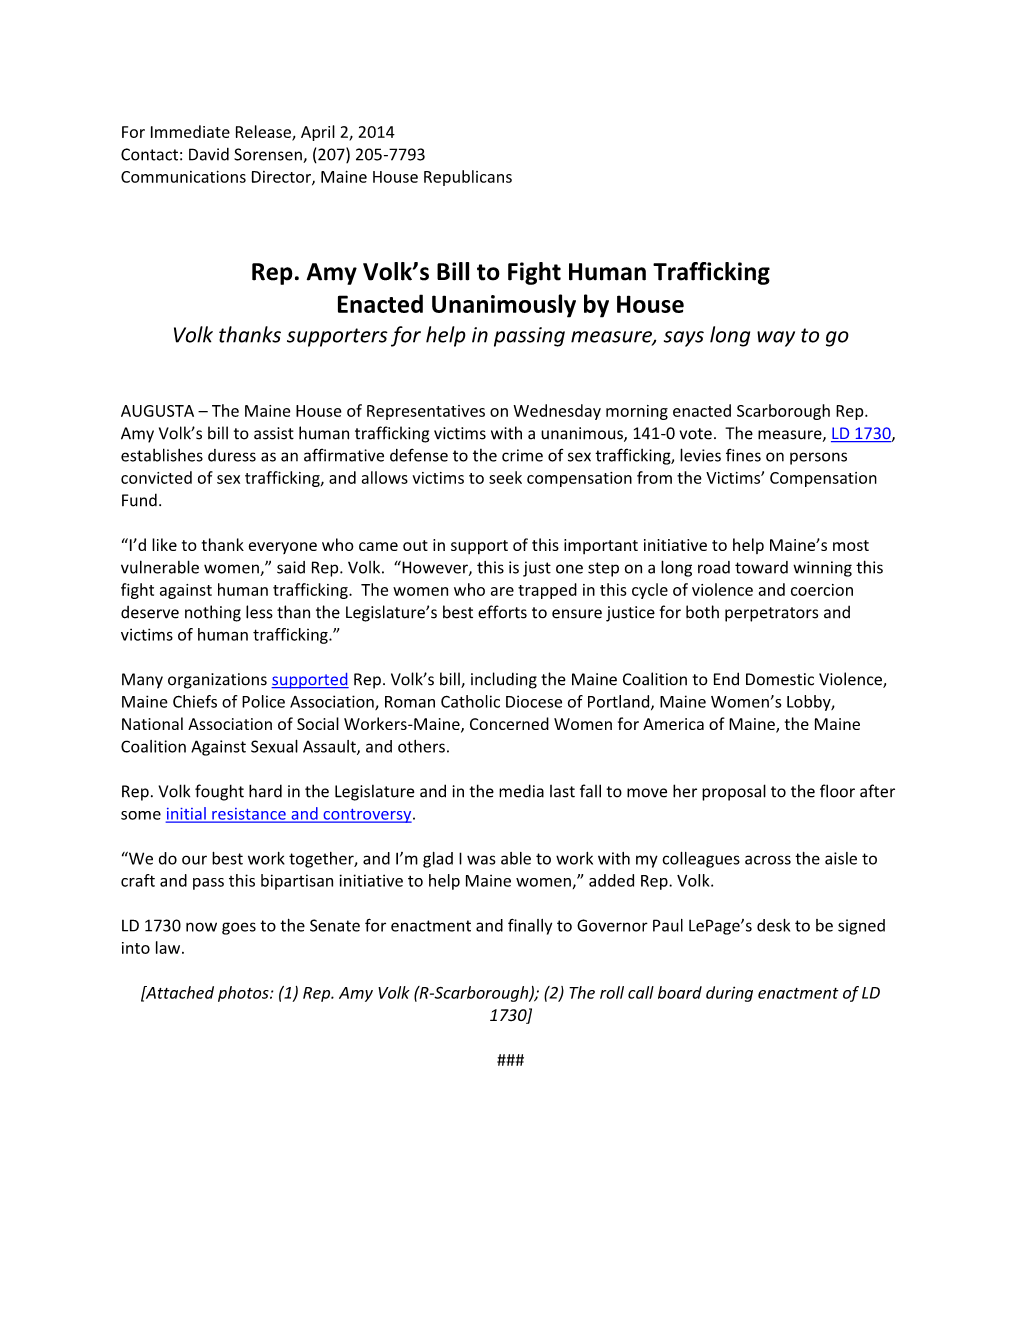 Rep. Amy Volk's Bill to Fight Human Trafficking Enacted Unanimously By